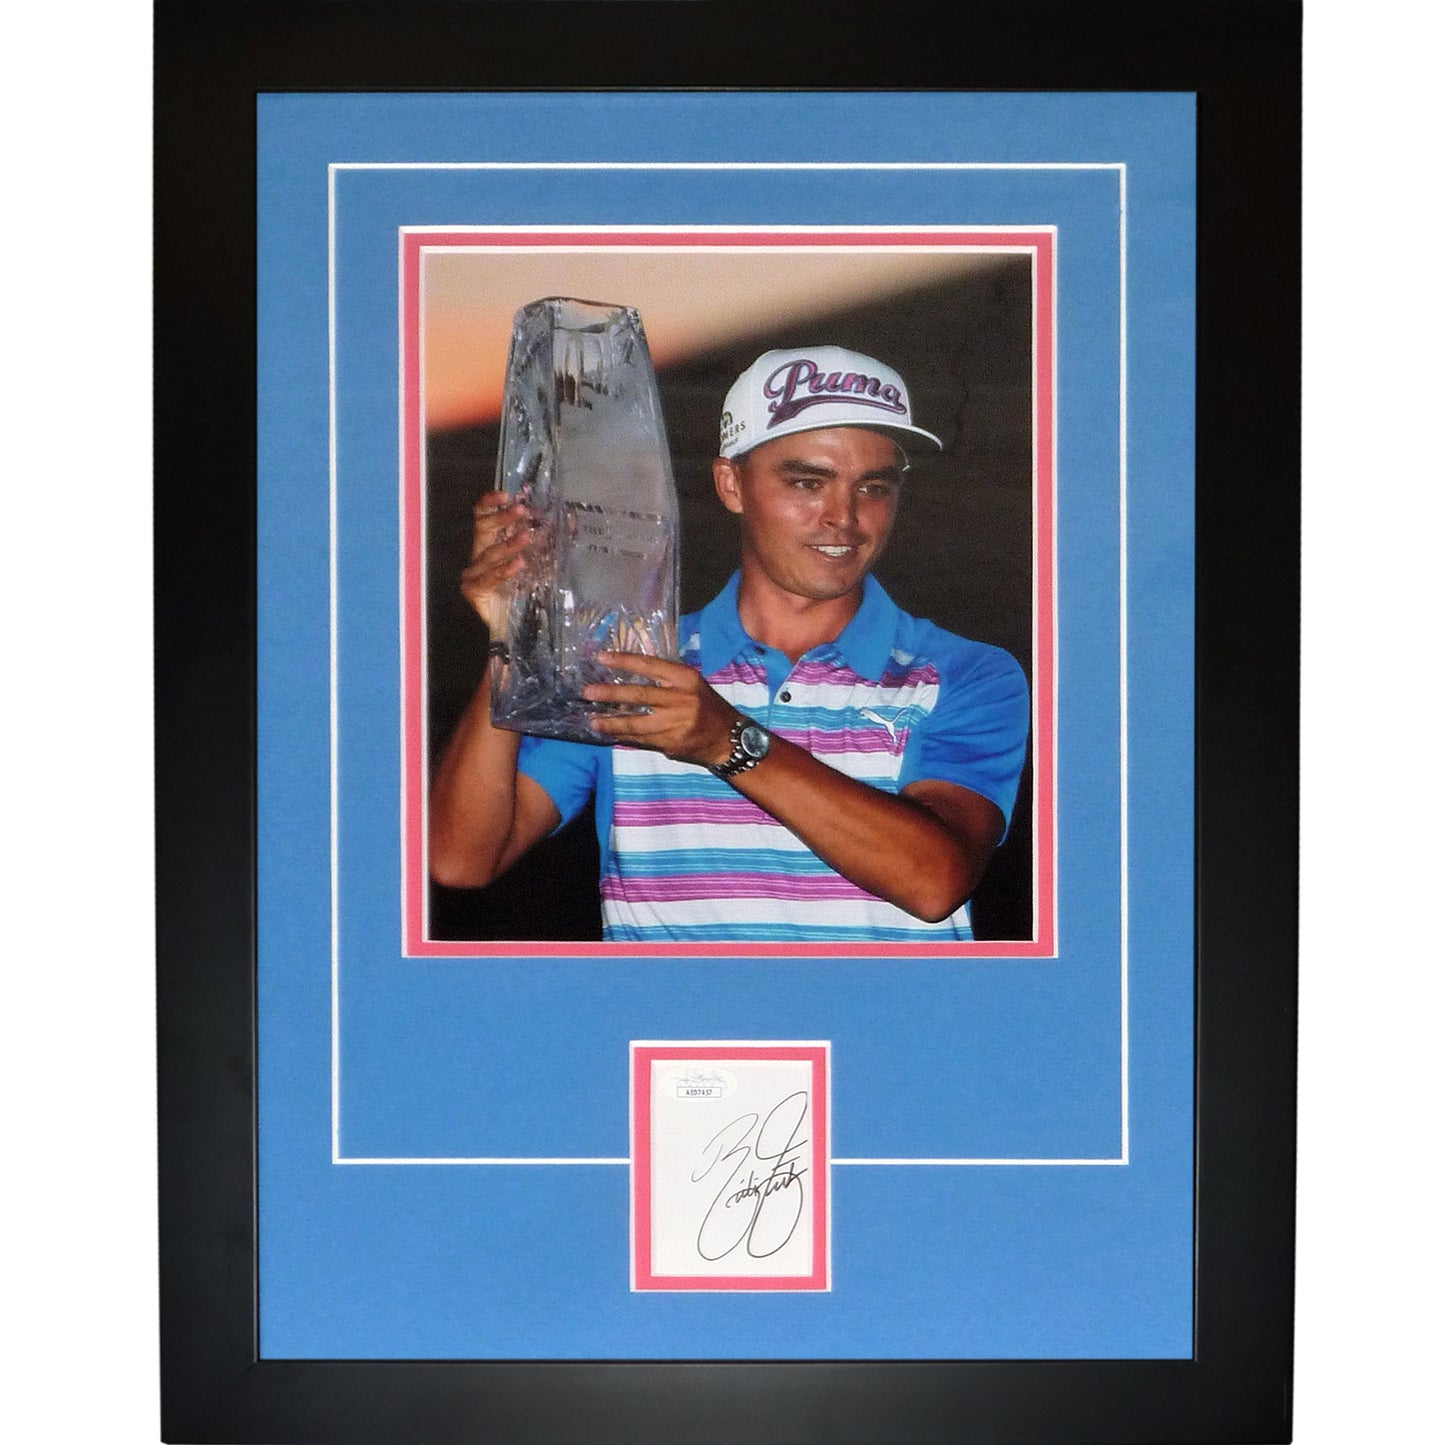 Rickie Fowler Autographed Golf (TPC Trophy) "Signature Series" Frame